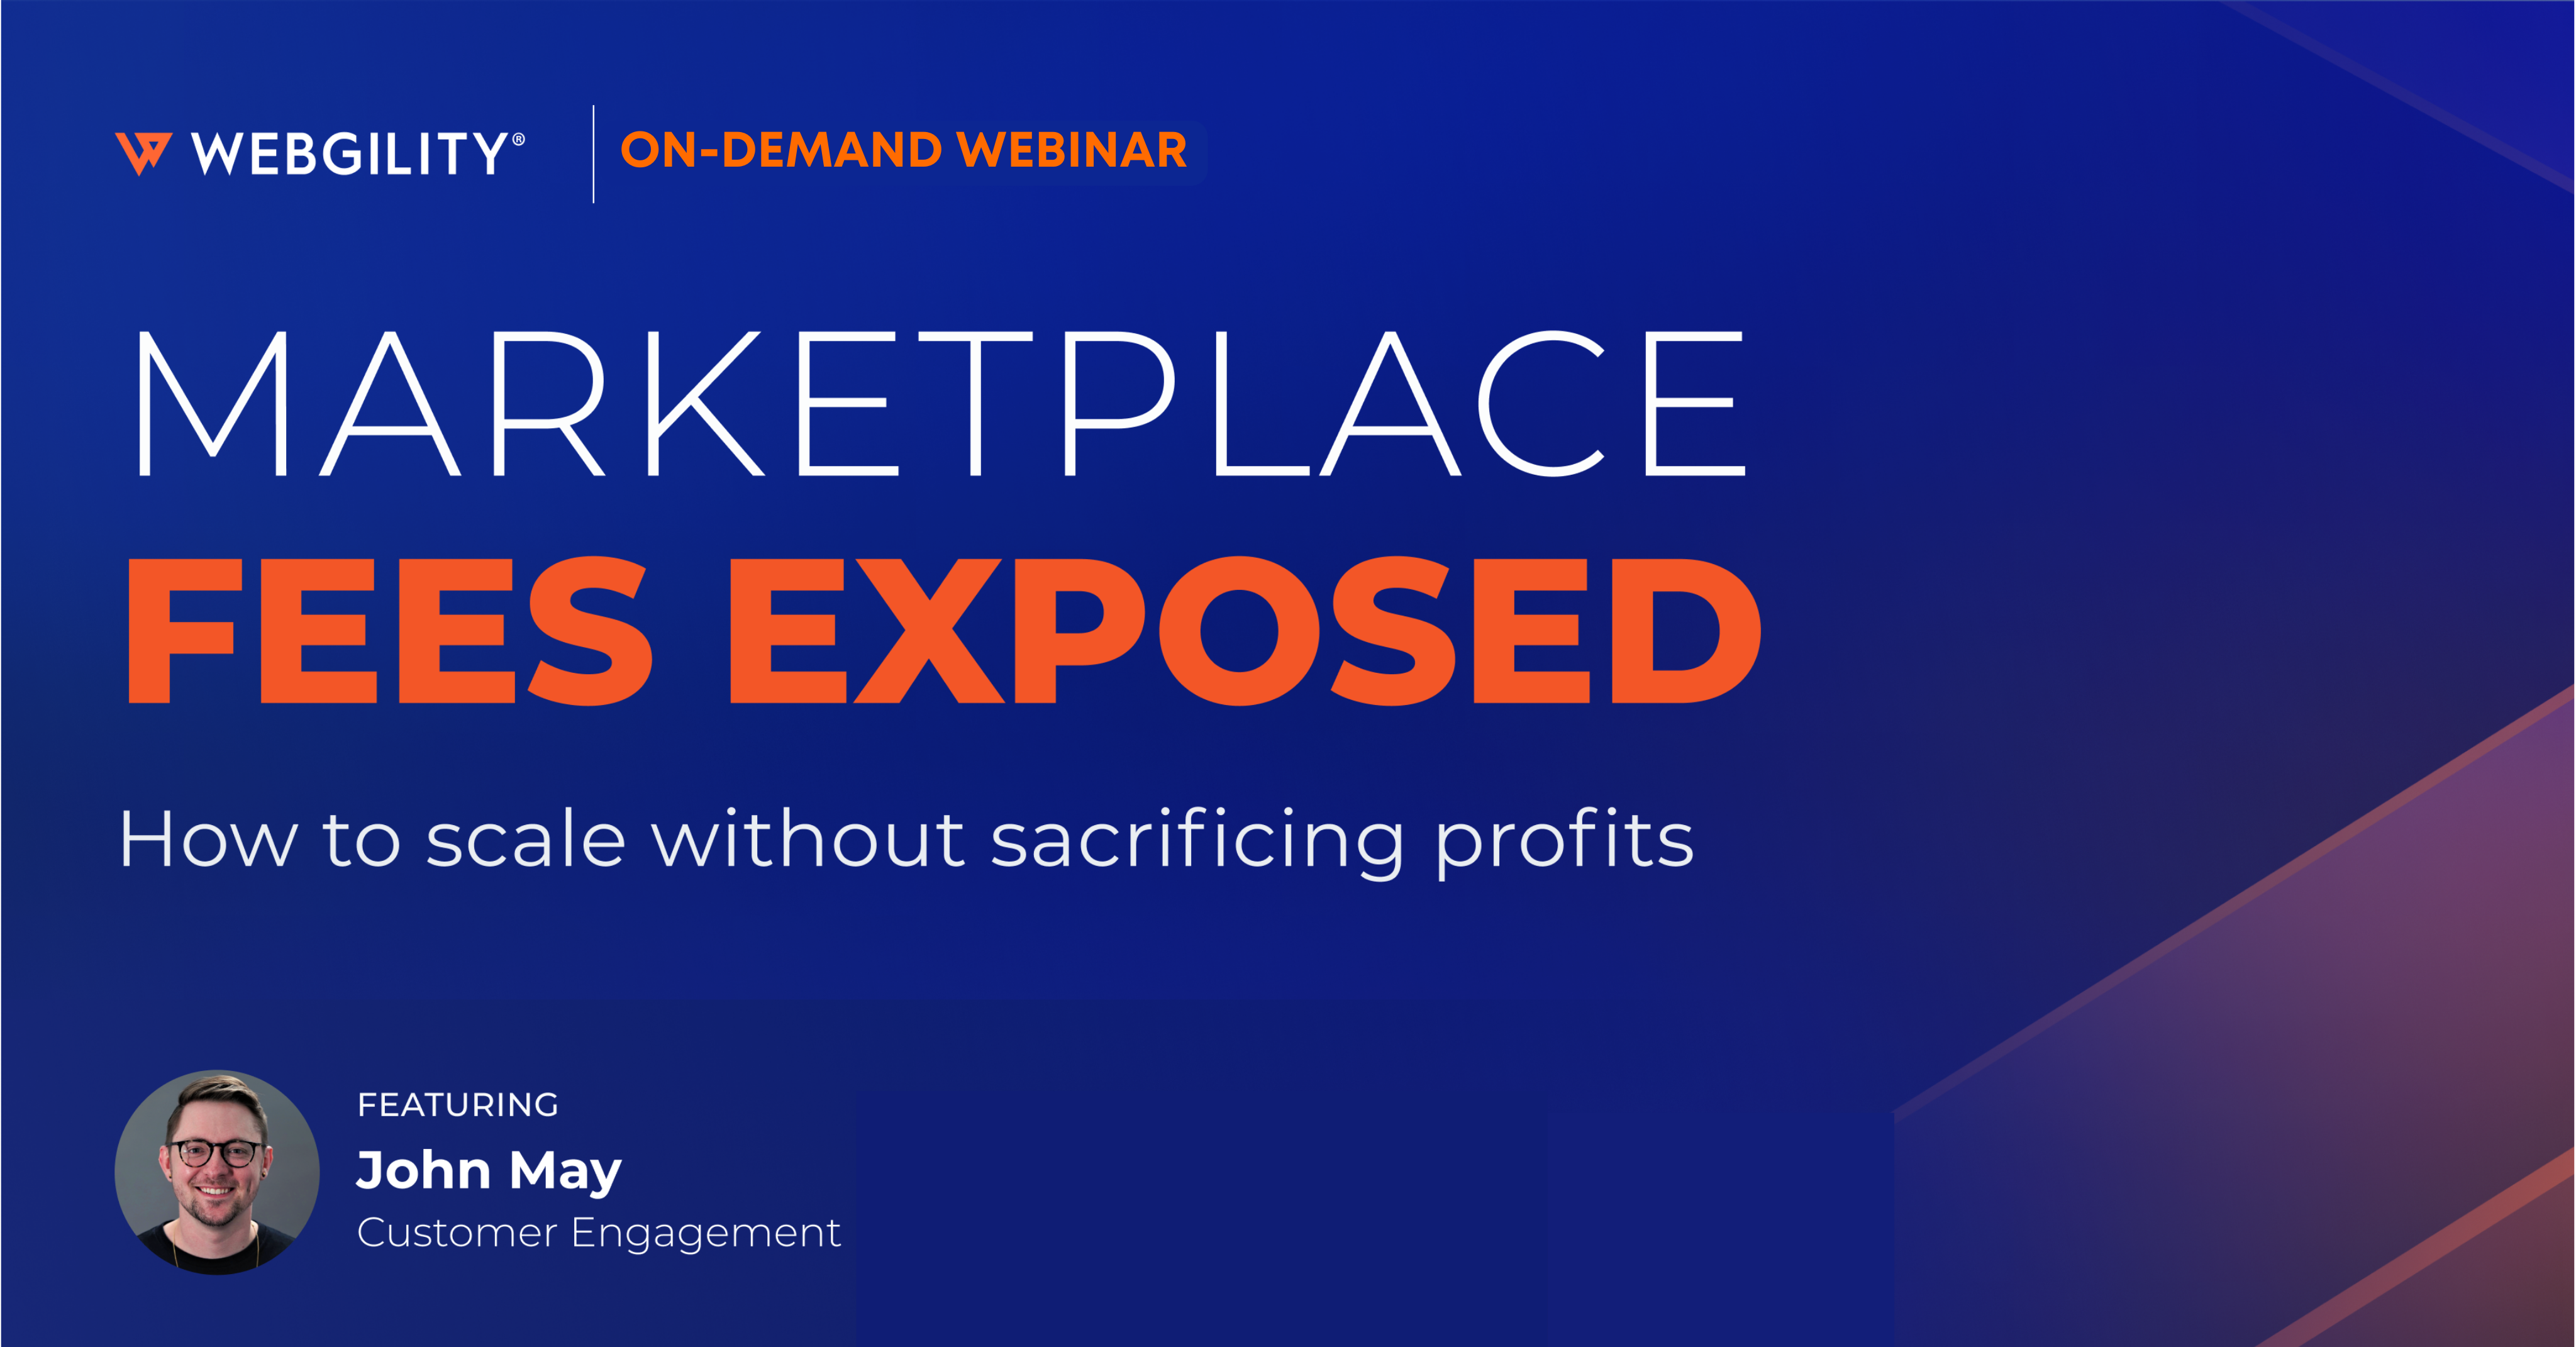 On-demand webinar. Marketplace Fees Exposed: How to scale without sacrificing profits, feat. John May, customer engagement.